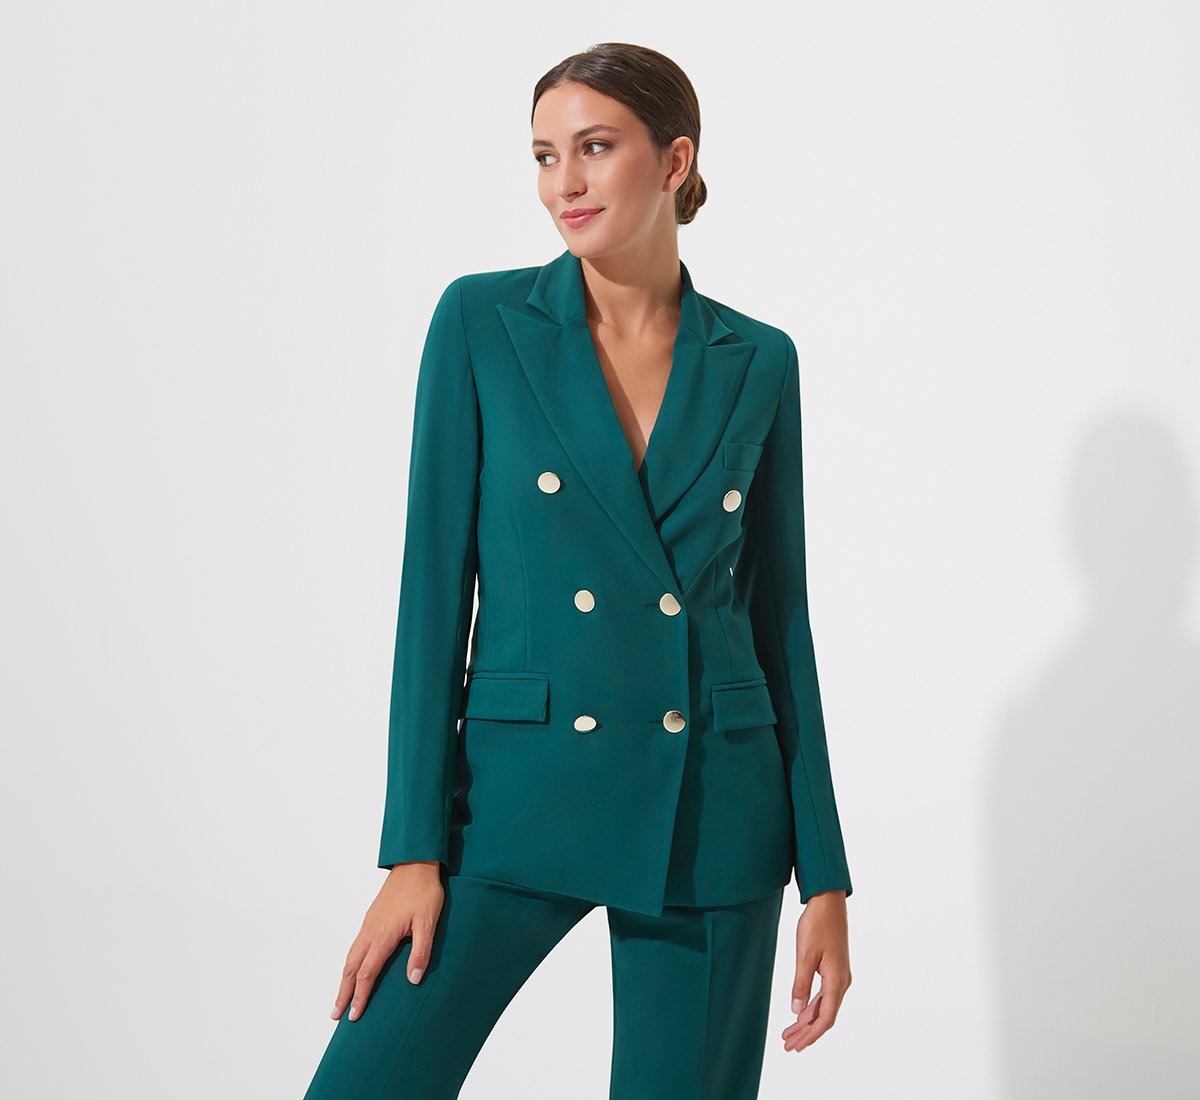 Green double-breasted jacket